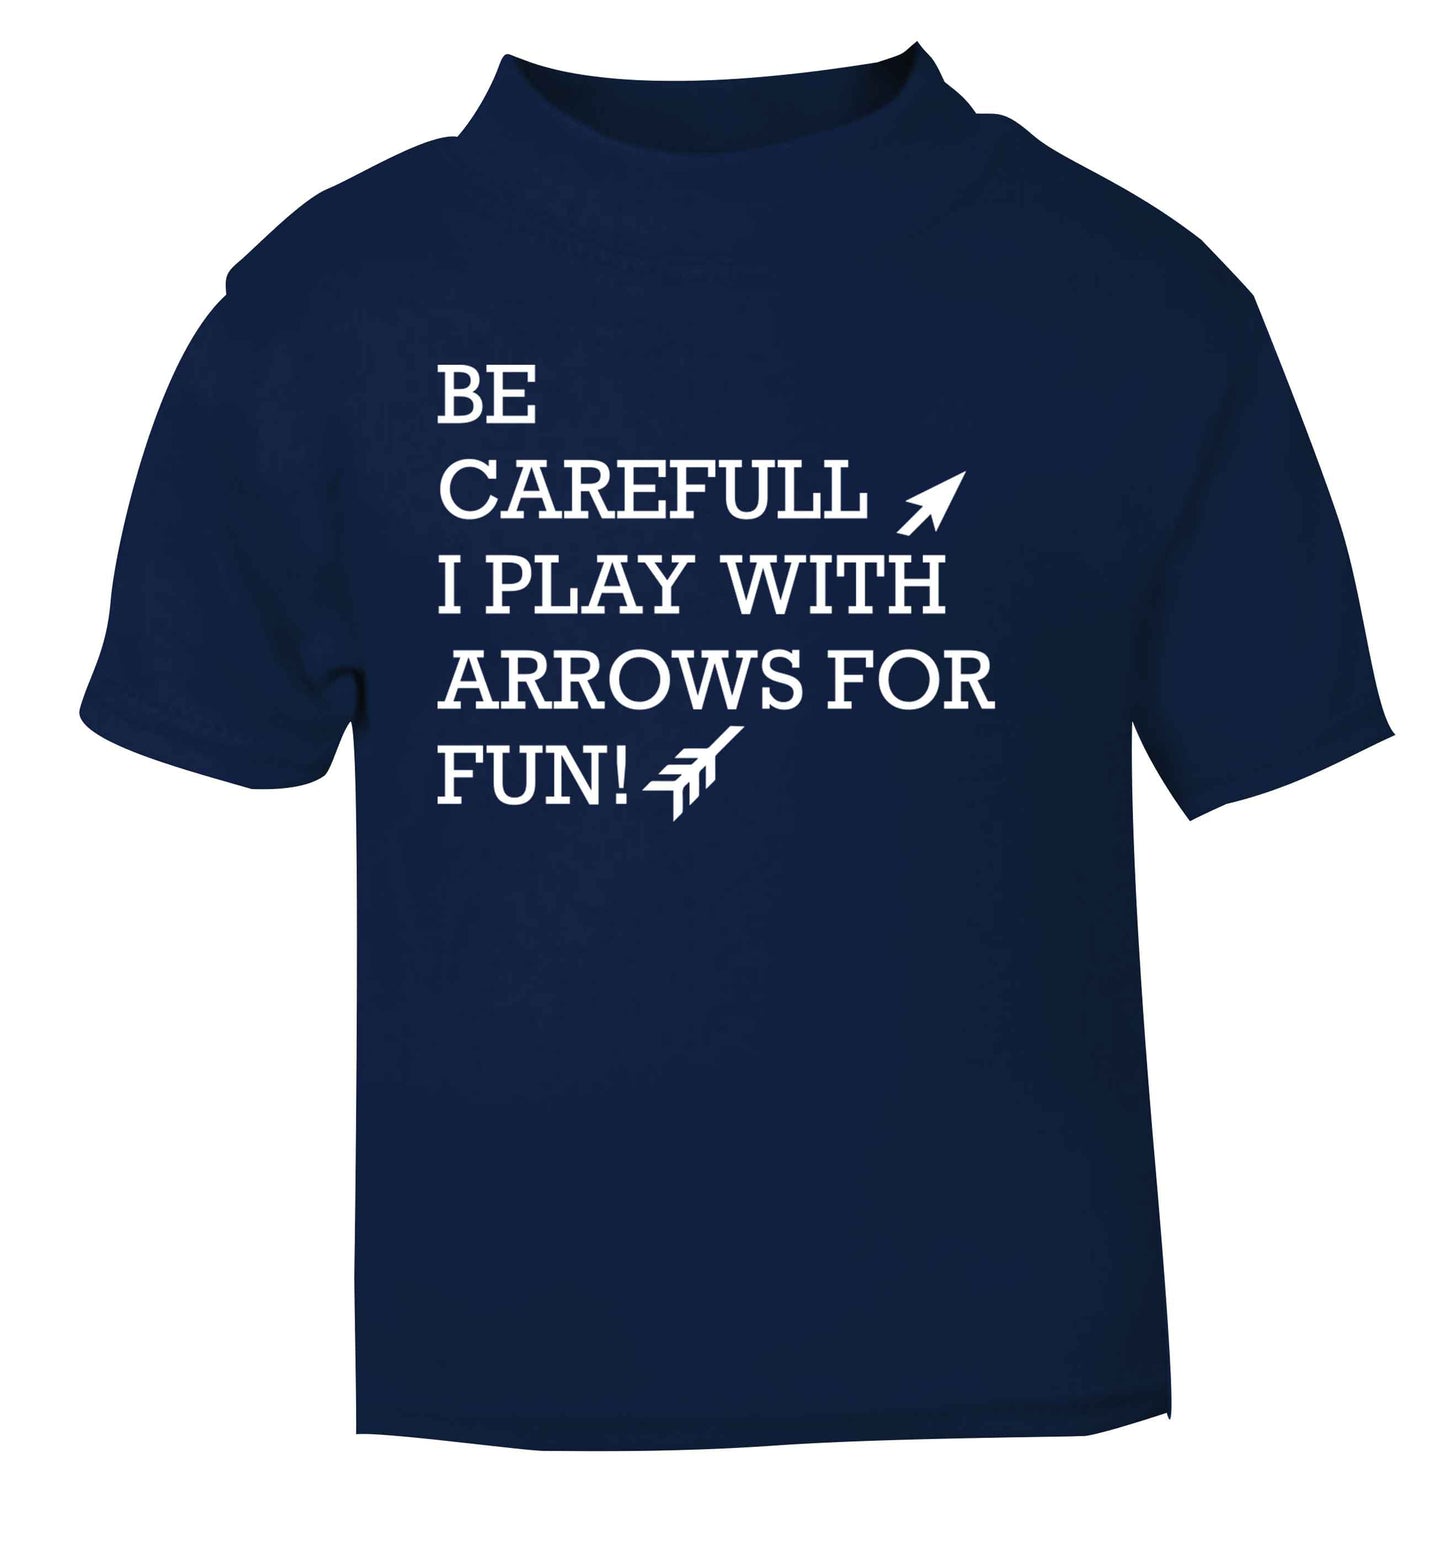 Be carefull I play with arrows for fun navy Baby Toddler Tshirt 2 Years